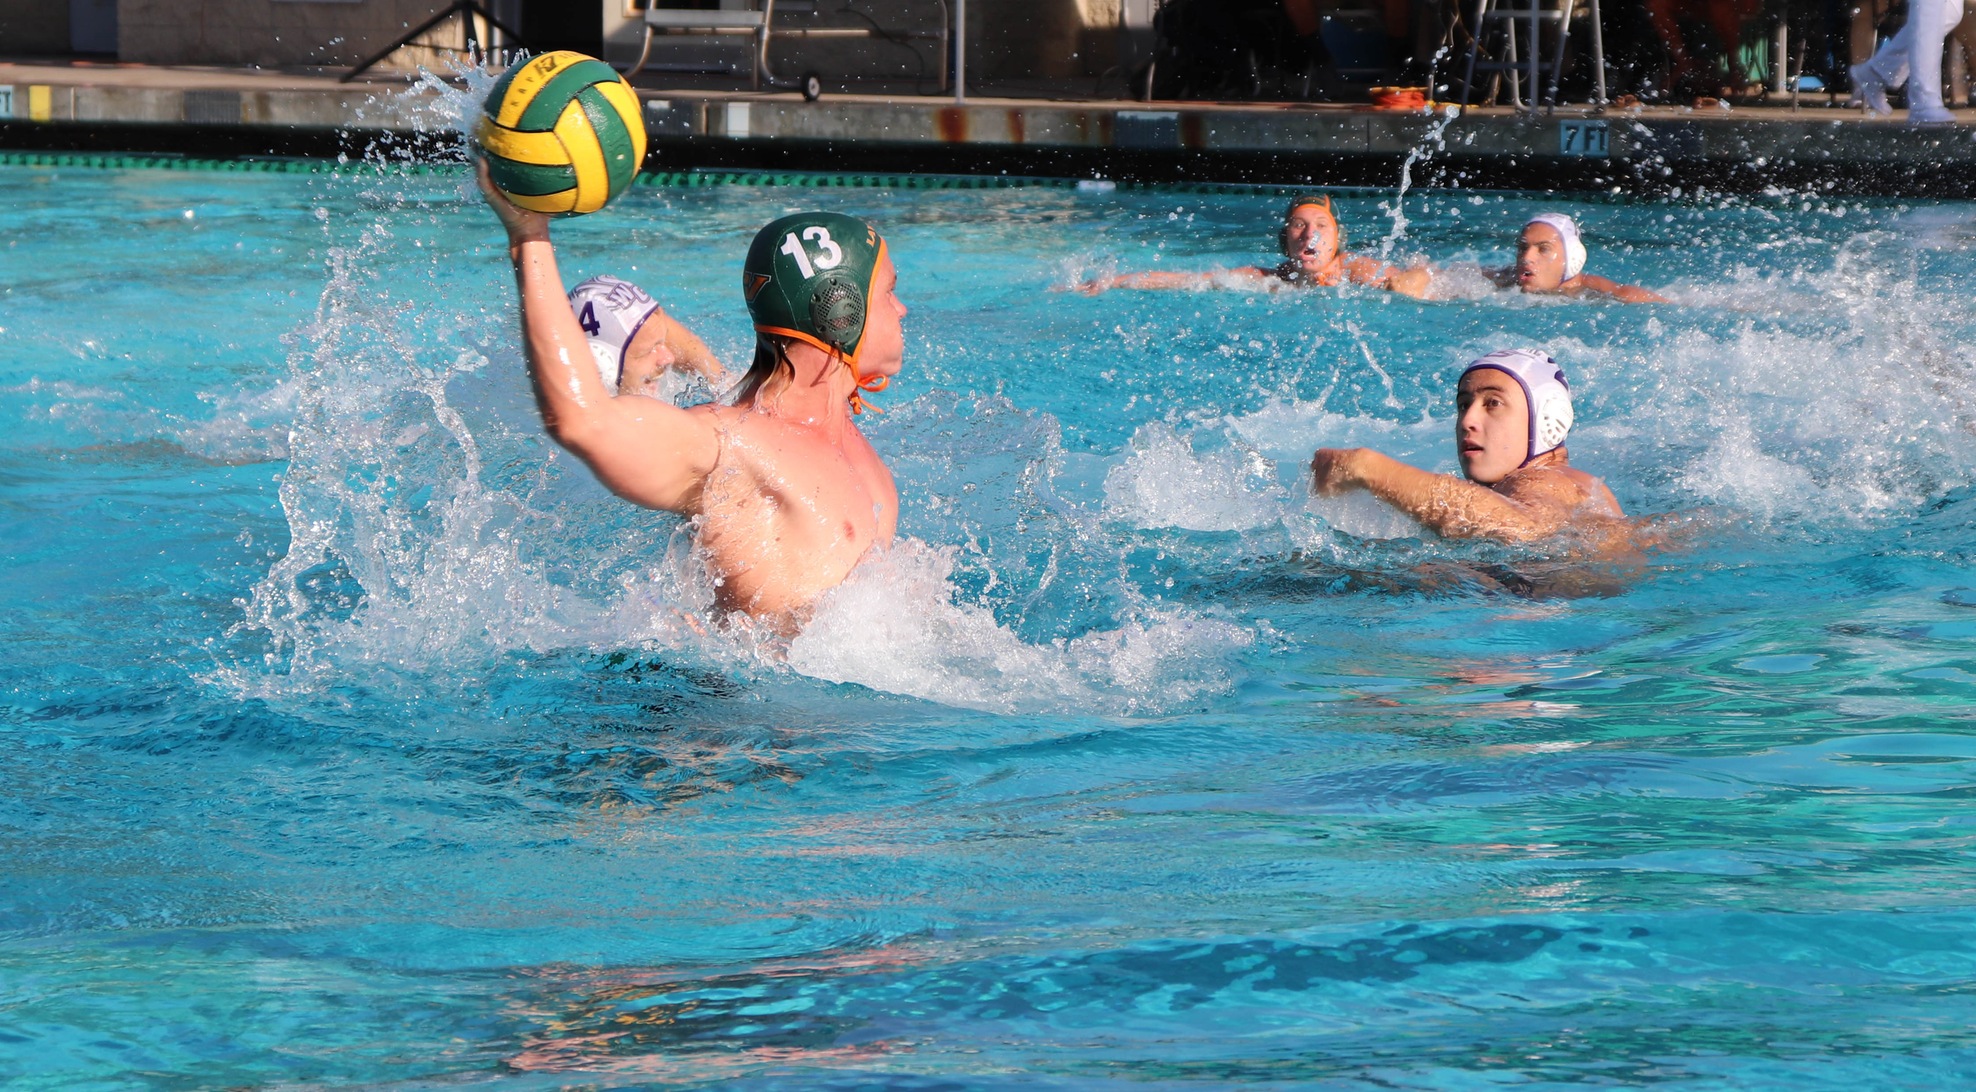 Late surge pushes No. 20 Poets past MWP